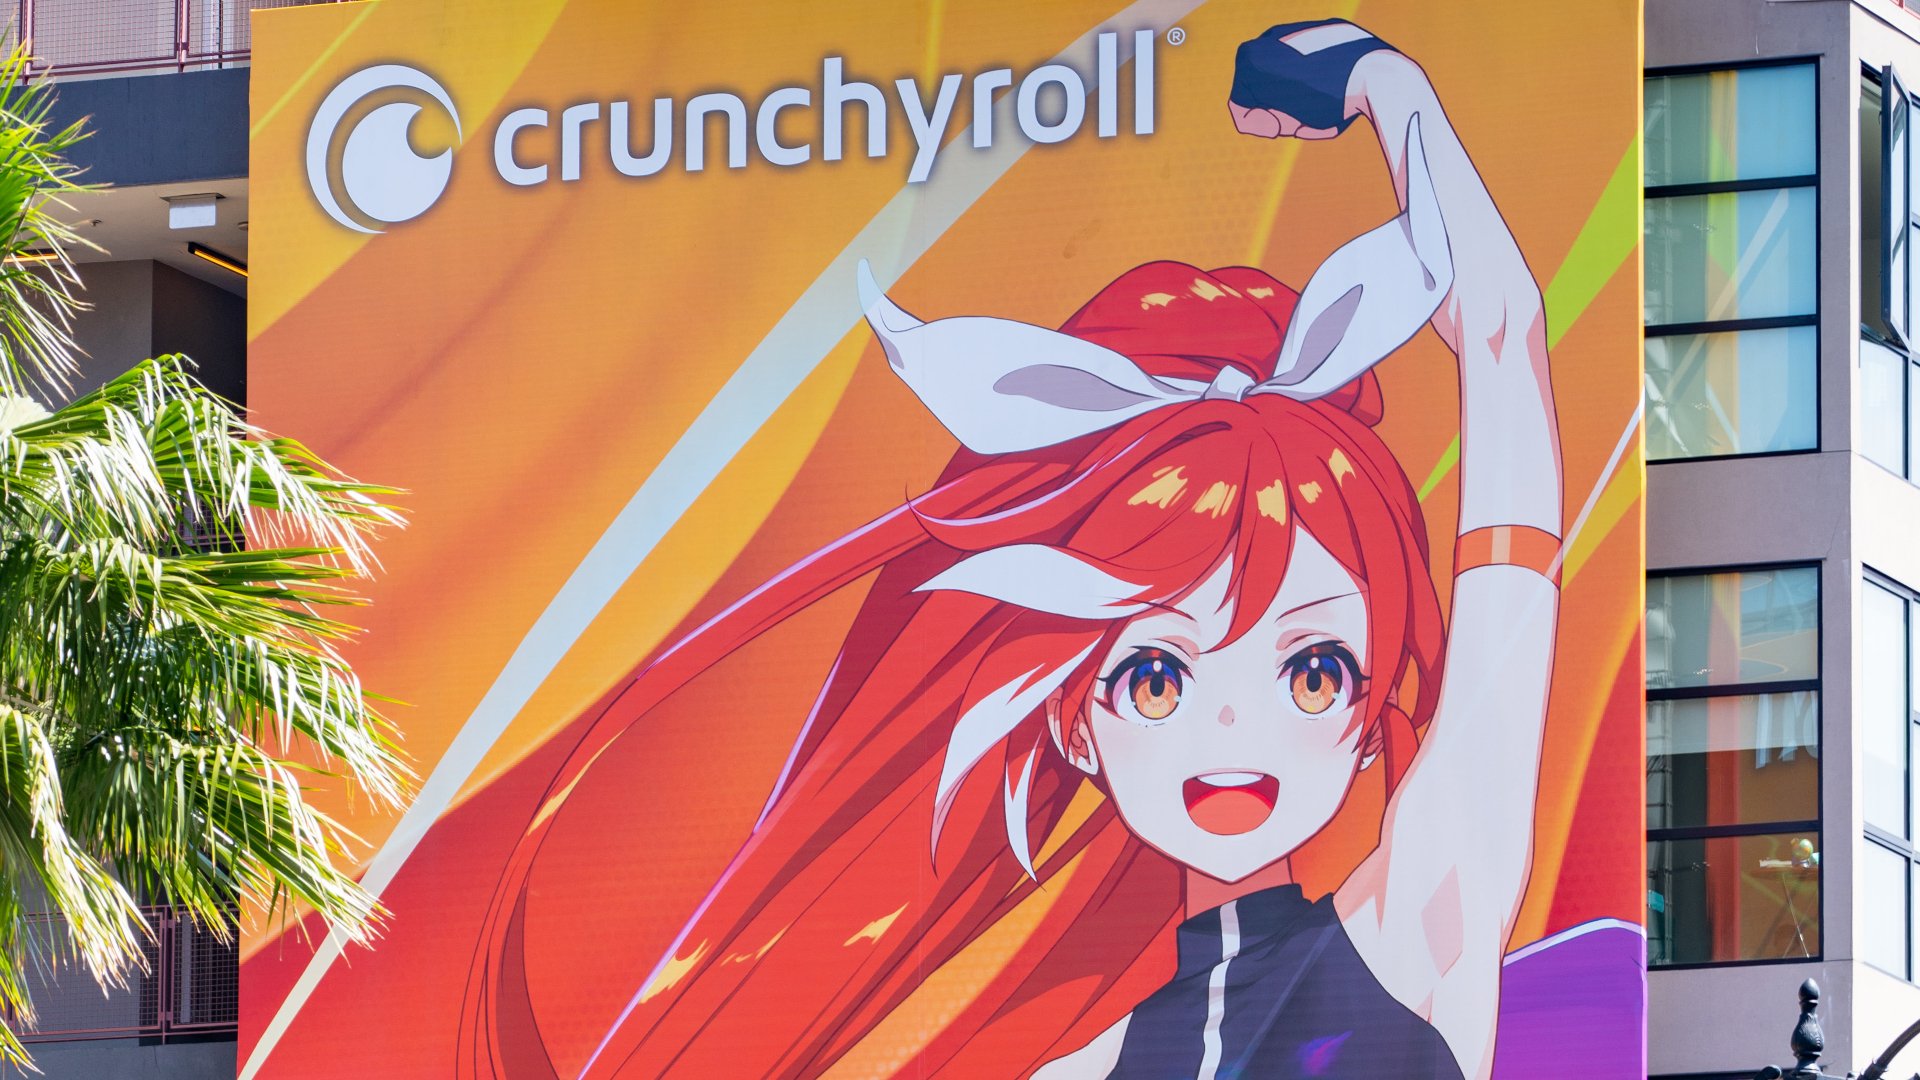 We need to demand Netflix or Crunchy roll brings it back! : r